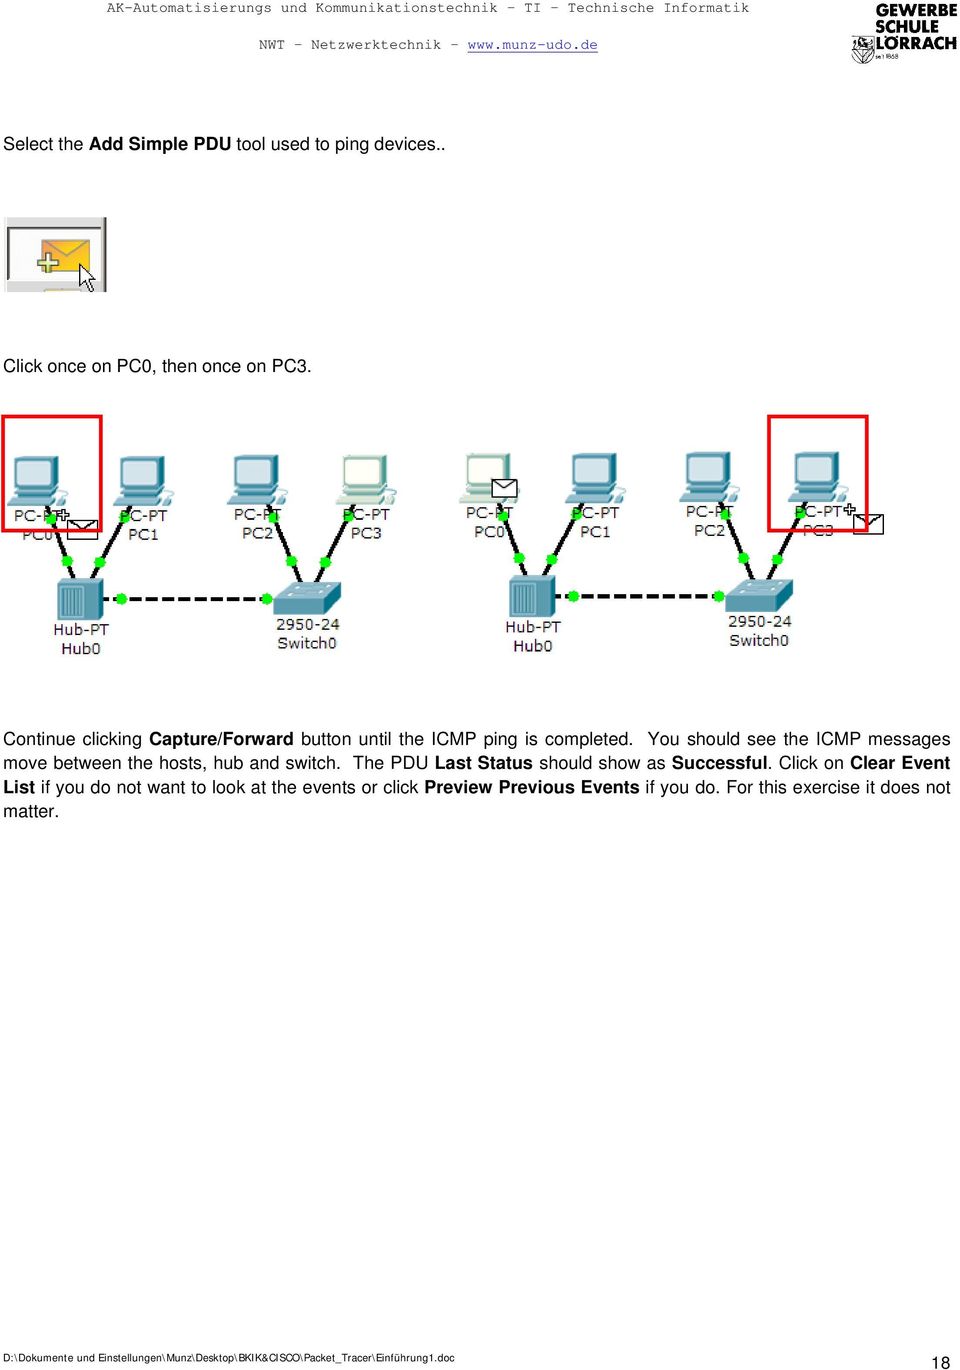 You should see the ICMP messages move between the hosts, hub and switch.